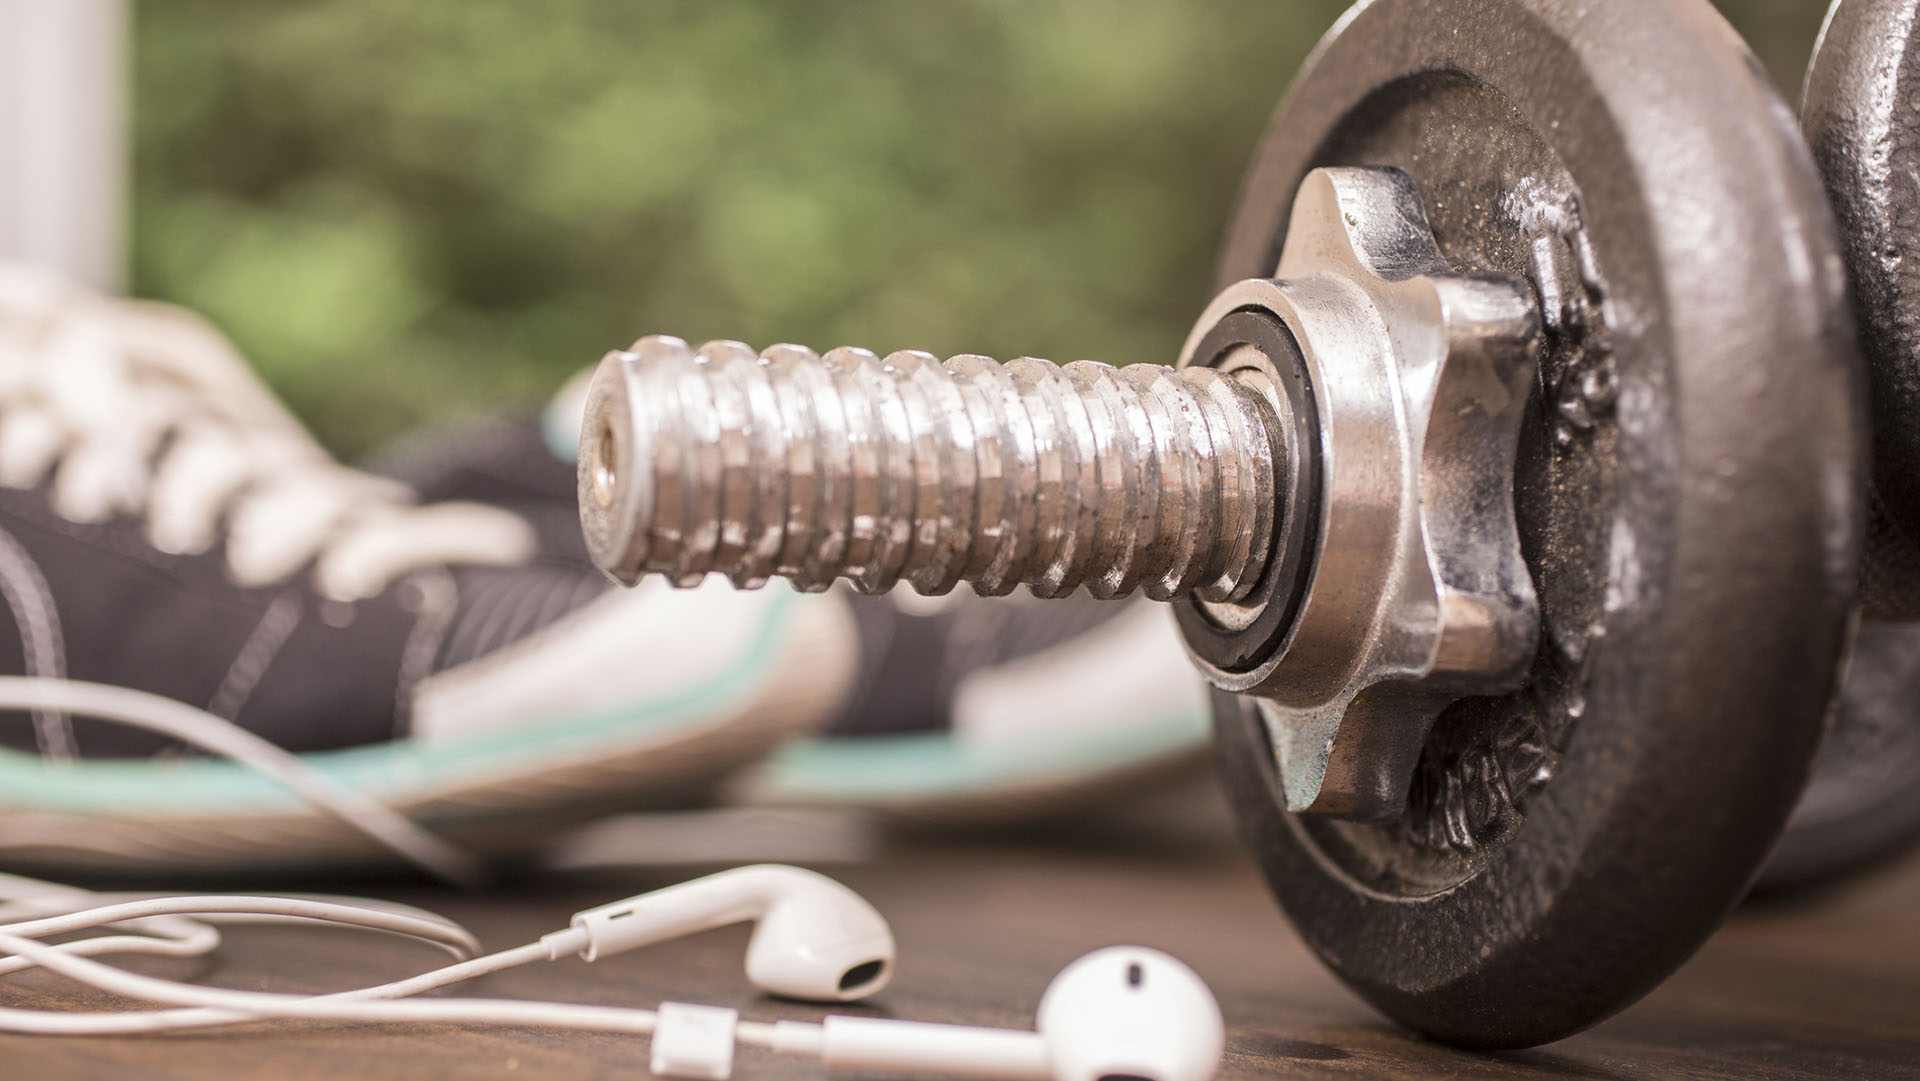 Fitness, exercise themed scene with barbells, sneakers, earbuds.  Group of objects lie on wooden surface in gym or health club setting with outdoors view in backgorund. Listening to music while working out.